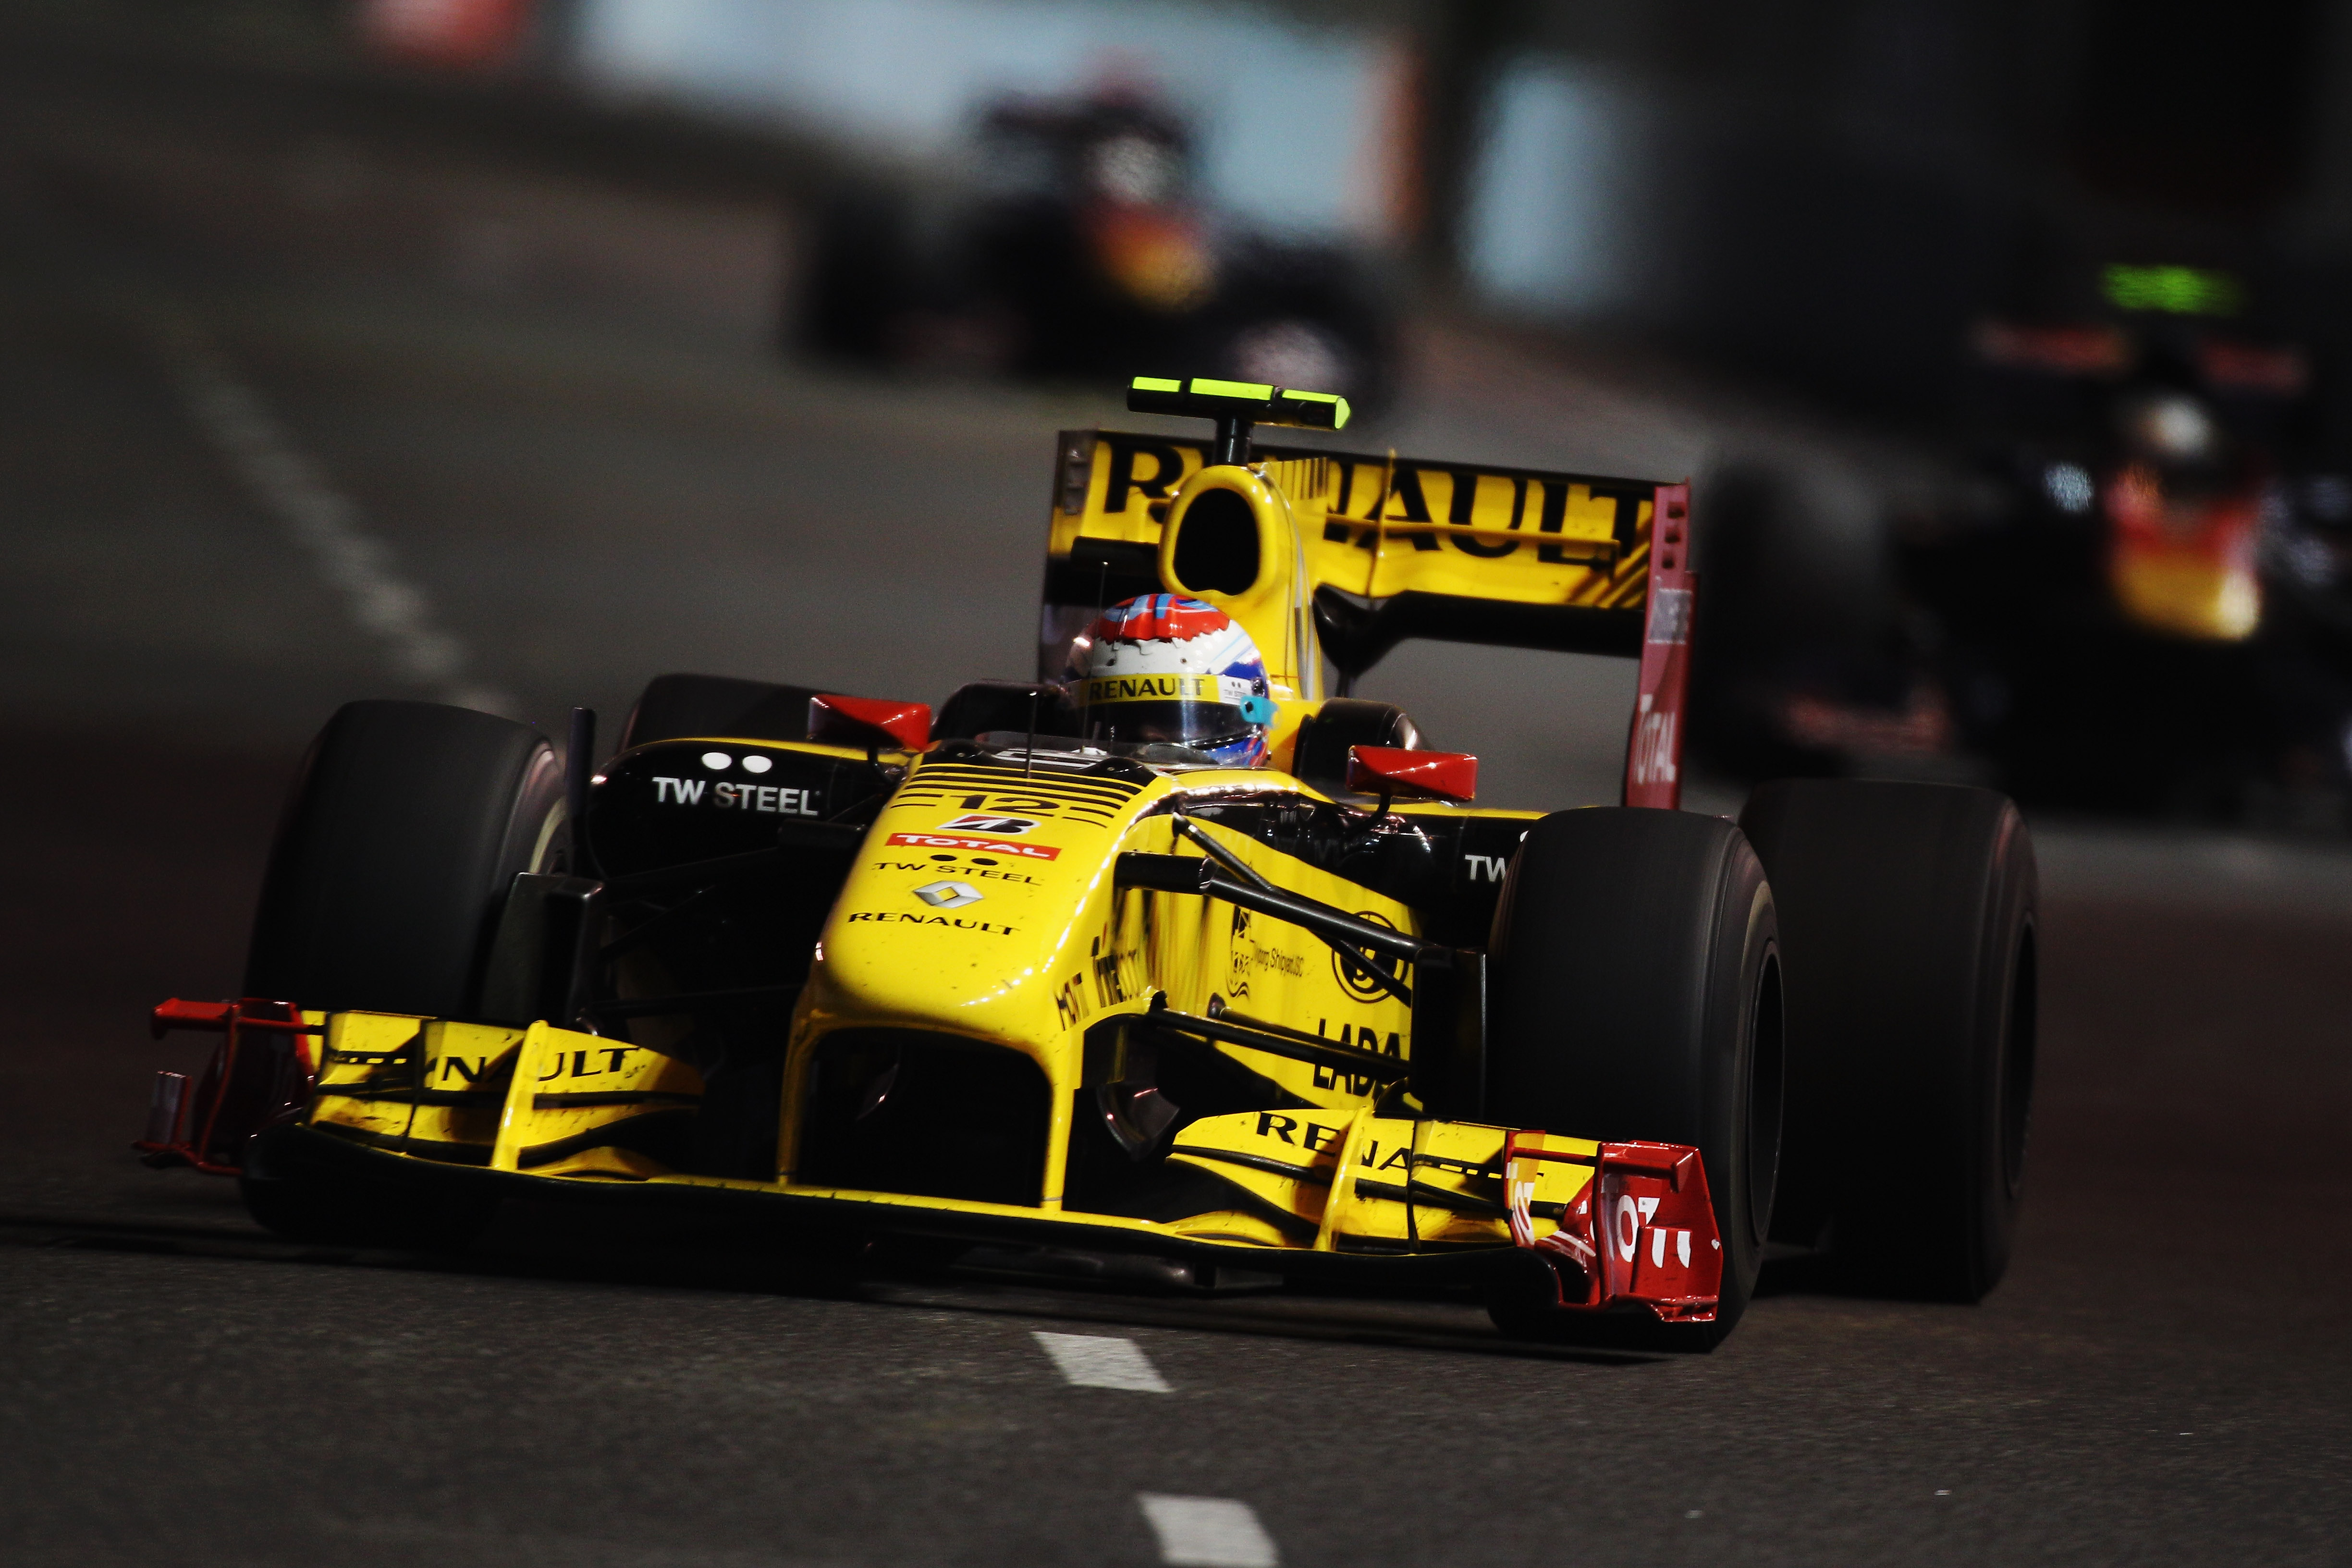 SINGAPORE - SEPTEMBER 26:  Vitaly Petrov of Russia and Renault drives during the Singapore Formula One Grand Prix at the Marina Bay Street Circuit on September 26, 2010 in Singapore.  (Photo by Mark Thompson/Getty Images)